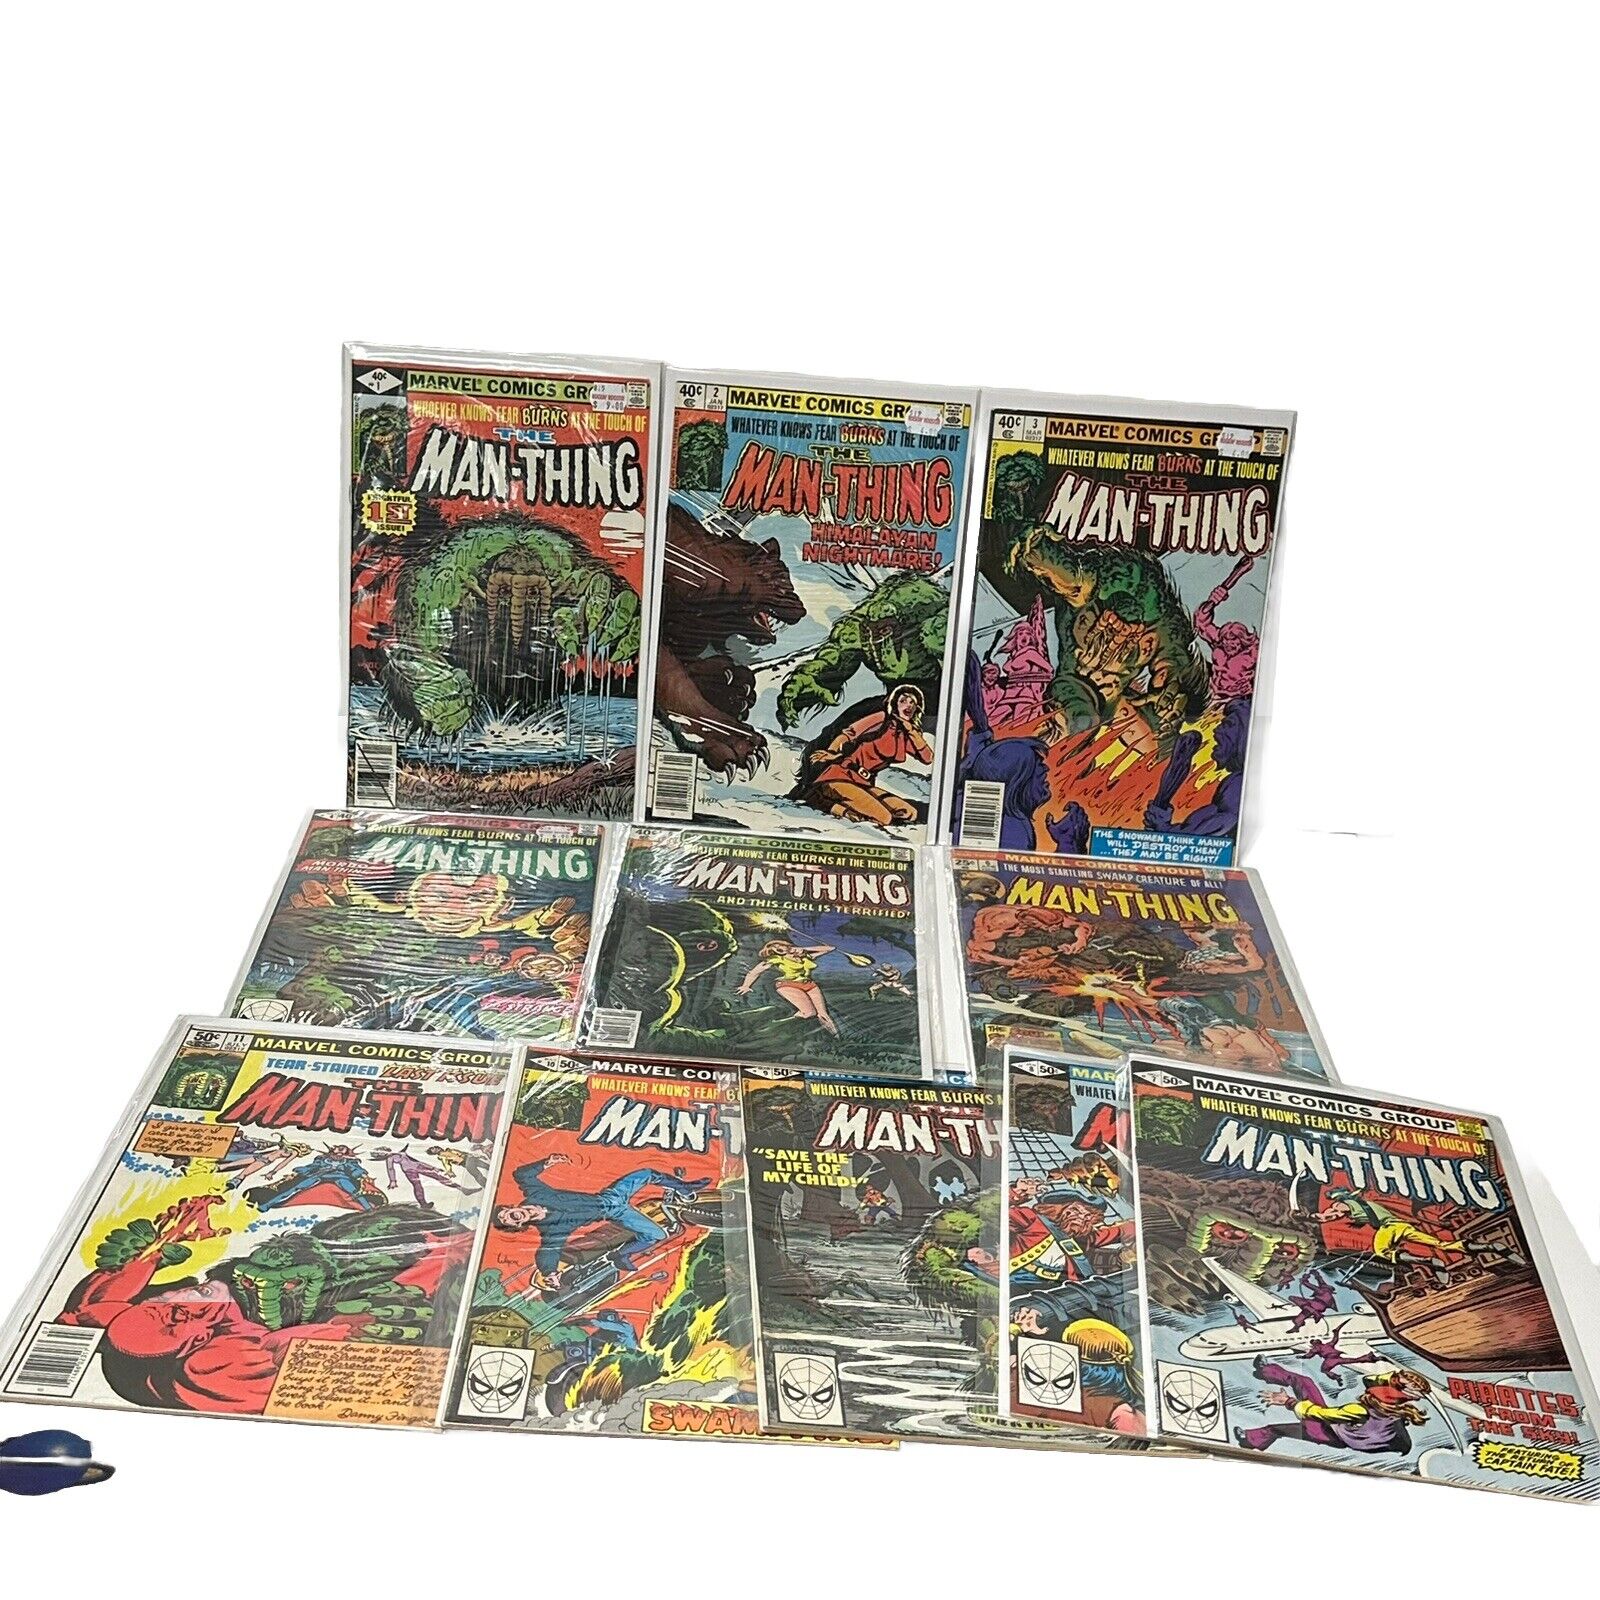 THE MAN-THING #1-11 COMPLETE RUN  (11 BOOKS) - MARVEL COMICS Very Good